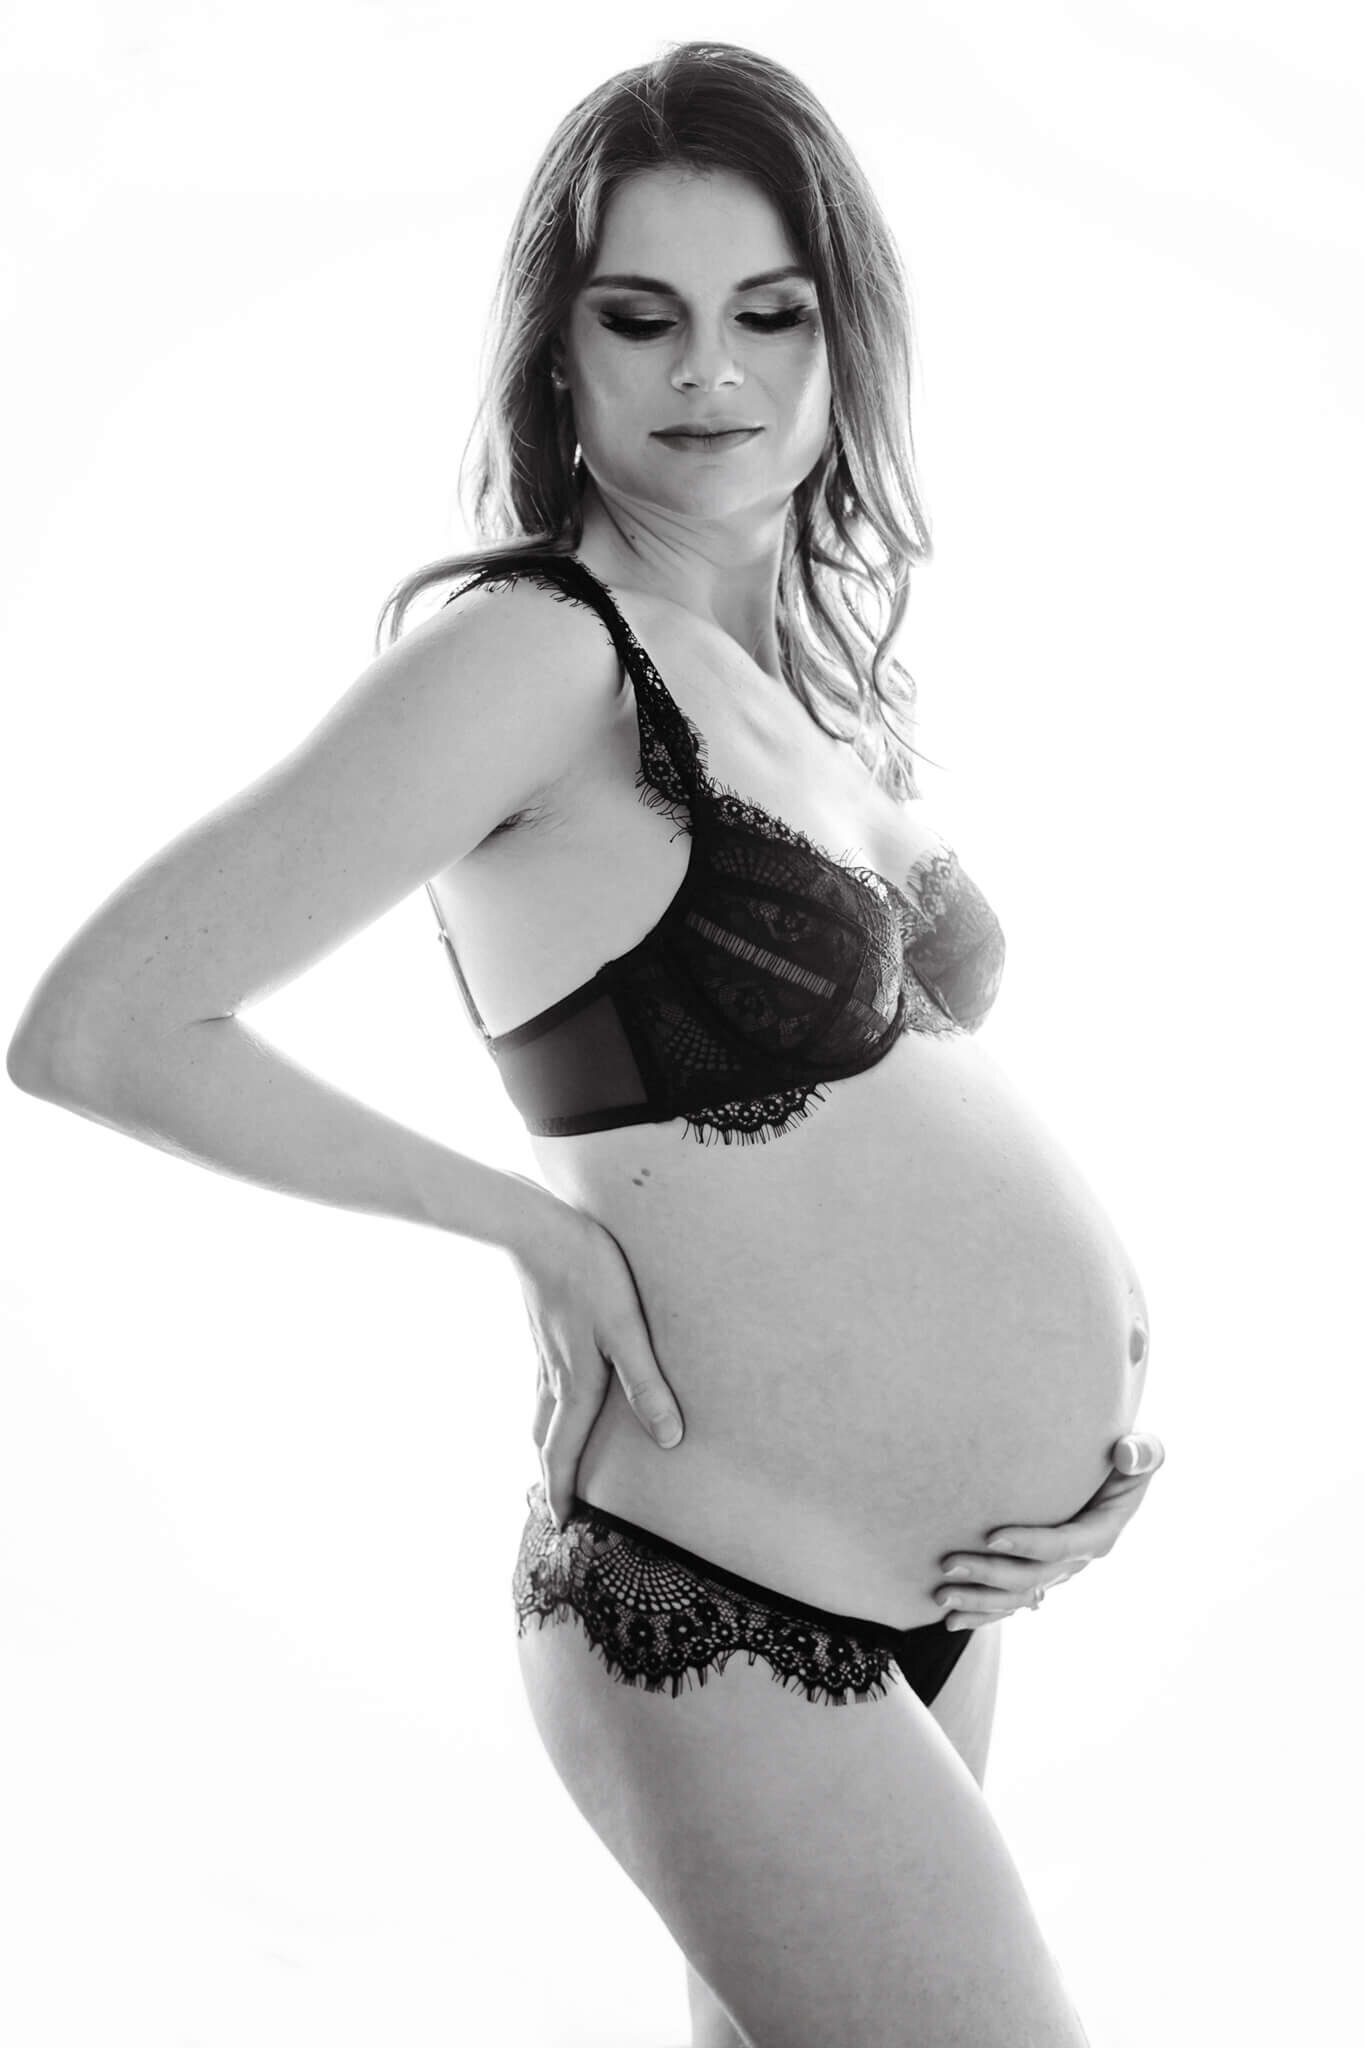 pregnant woman is looking down, one hand on her waist and the other one on her belly, she is wearing black lingerie for her maternity photoshoot